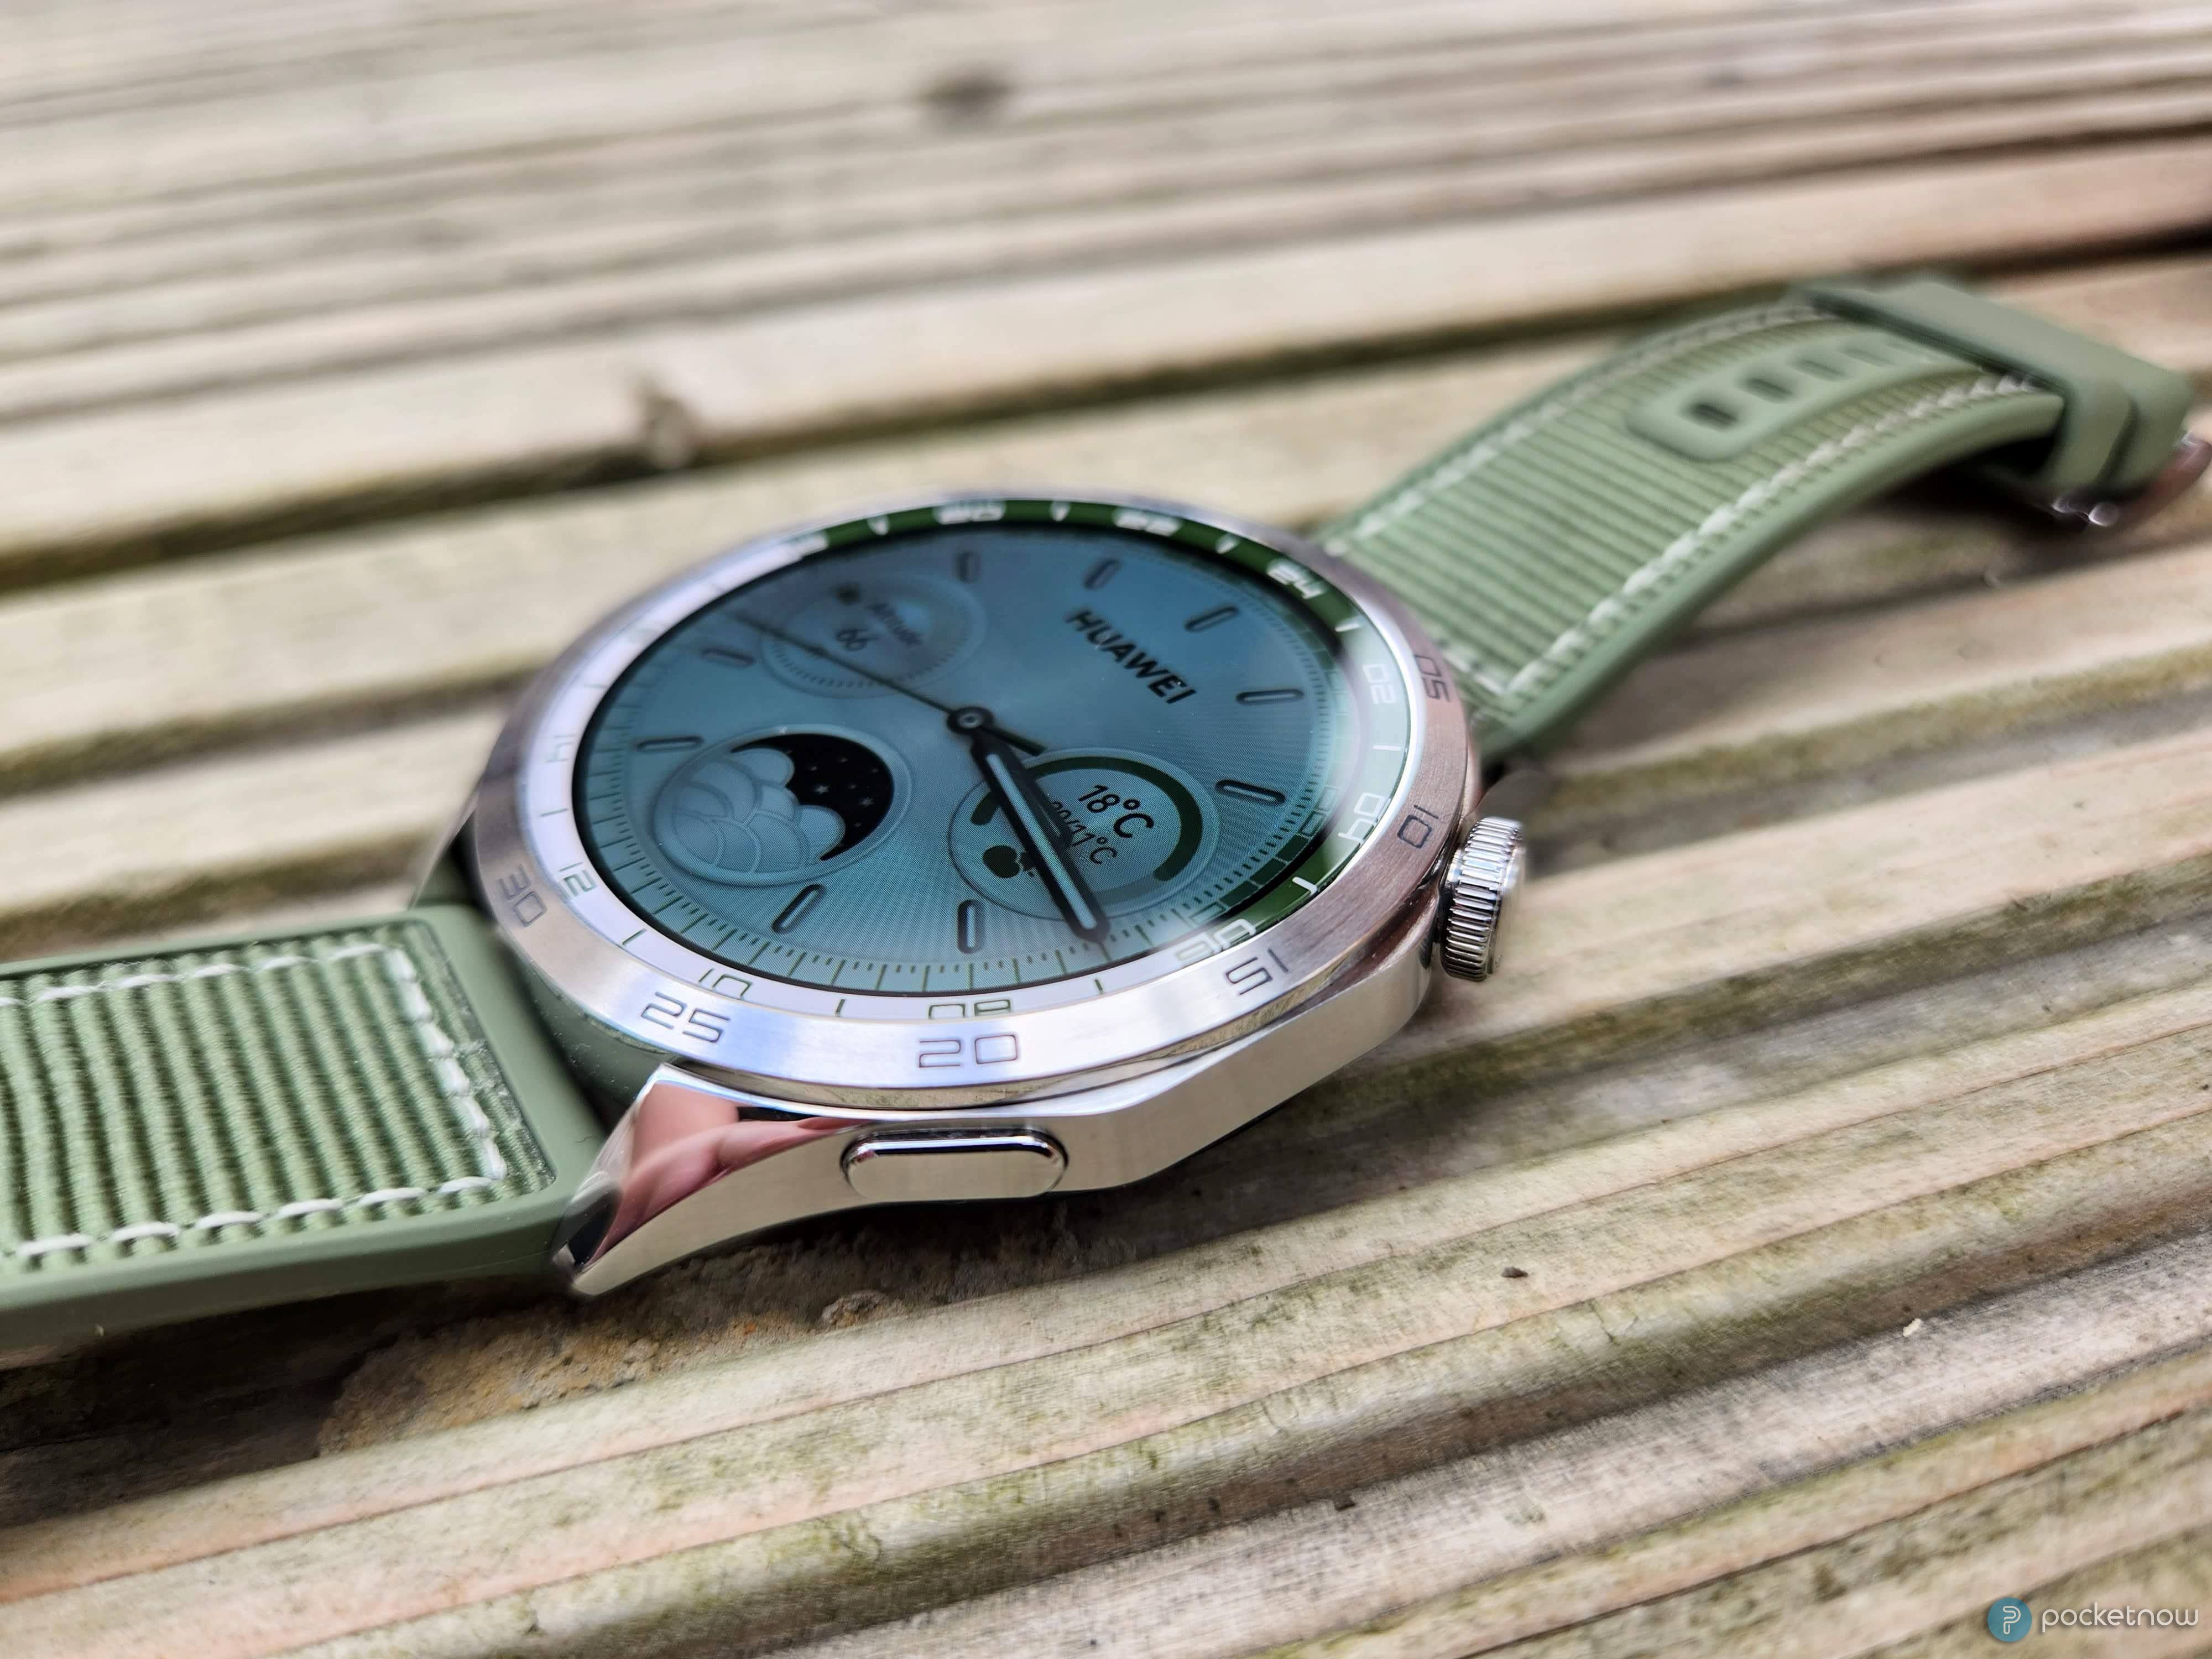 Huawei Watch GT 4 Review: More Than Just Looks